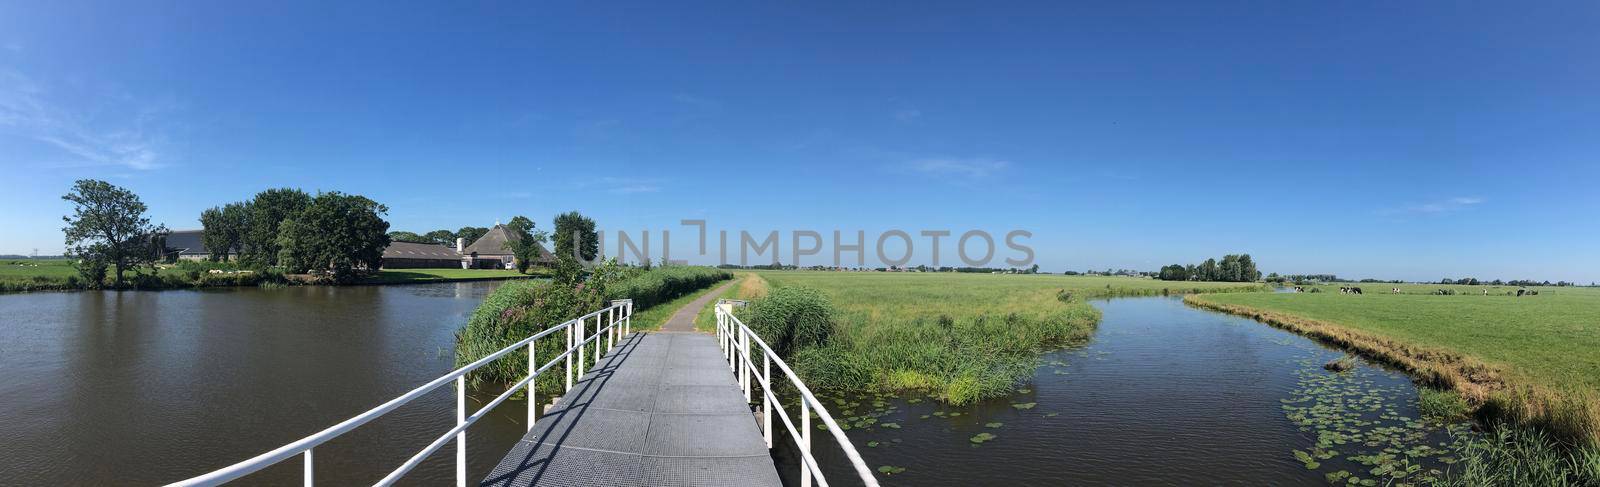 Bridge over a canal in Friesland, The Netherlands